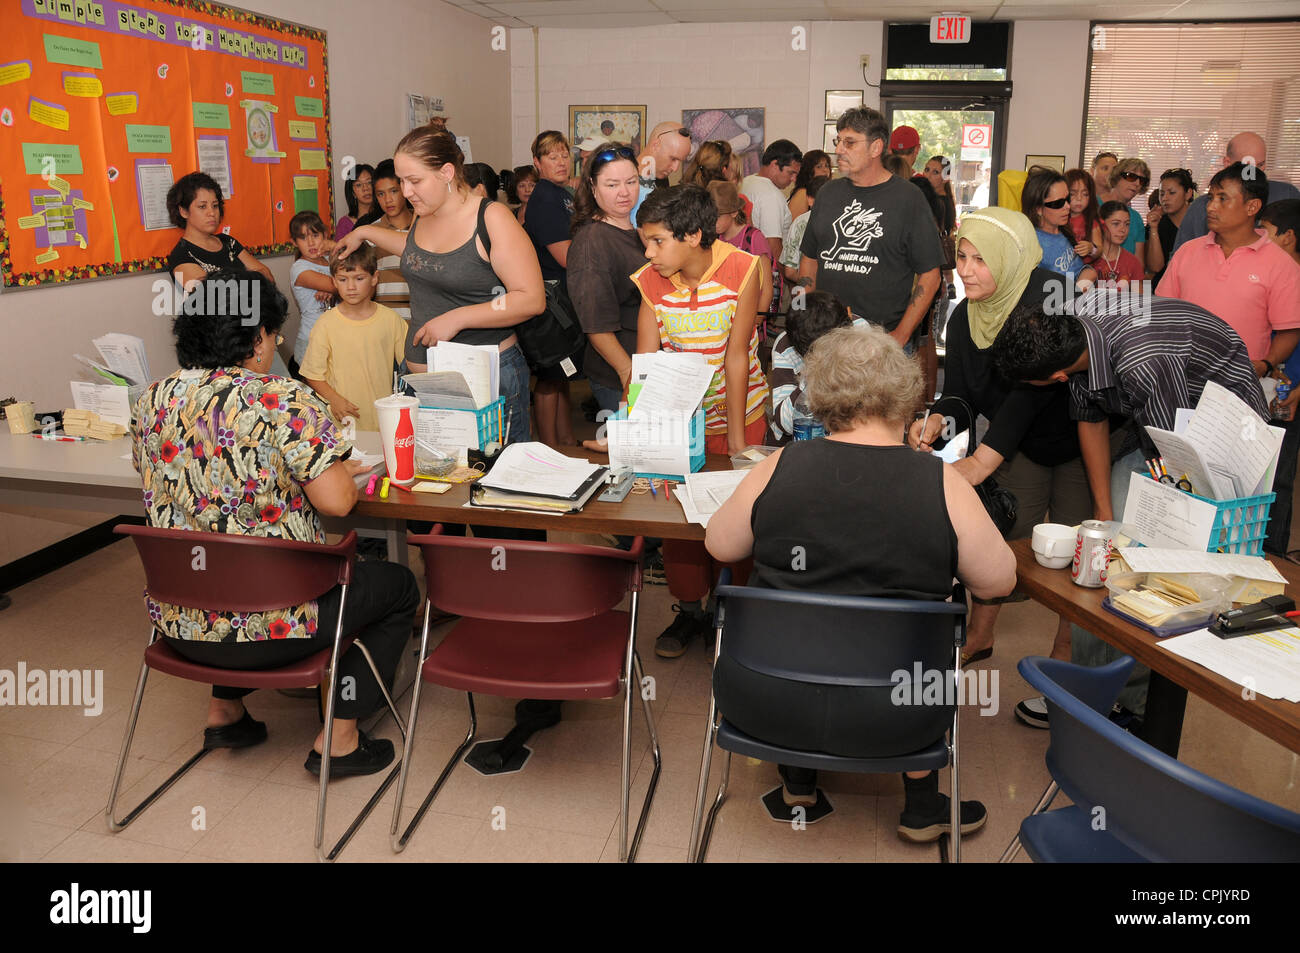 A shot clinic fills with those seeking vaccines for immunization from swine flu or H1N1 virus. Stock Photo